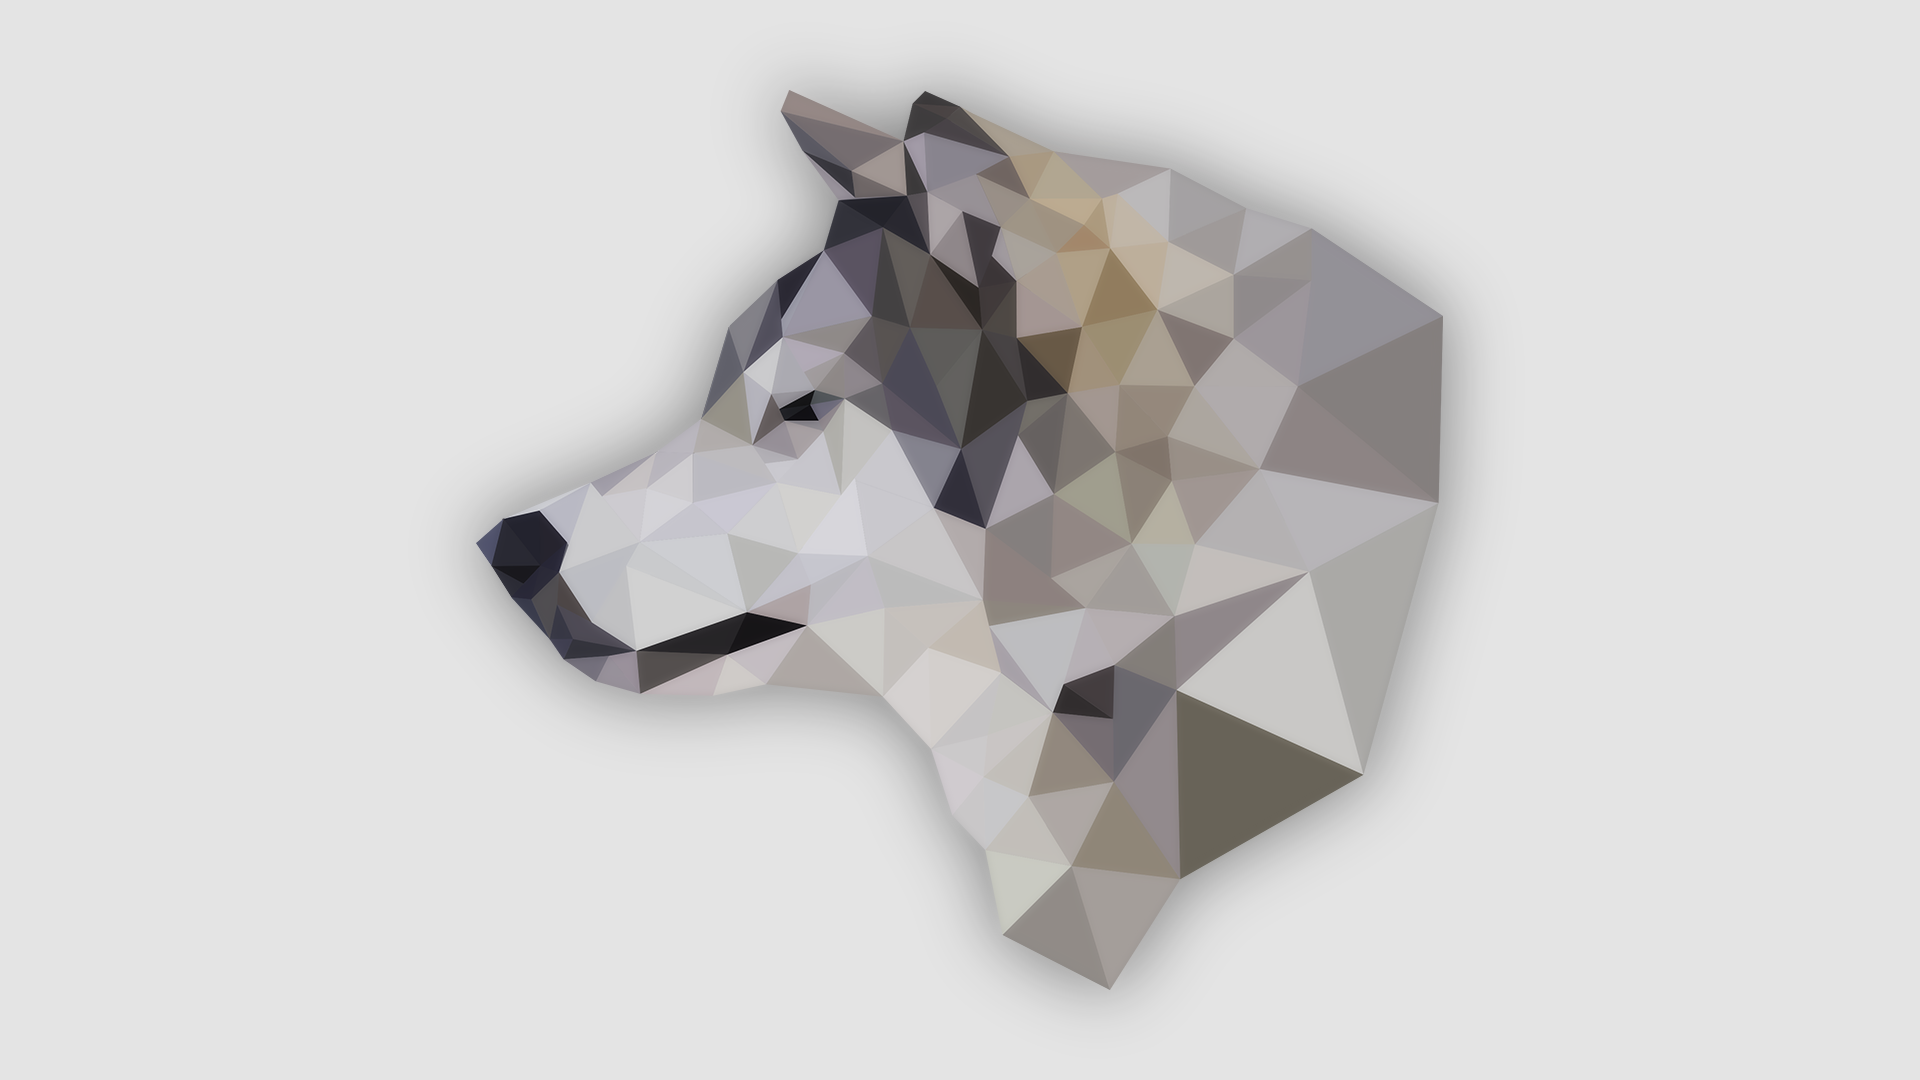 Crystal silhouette of a wolf